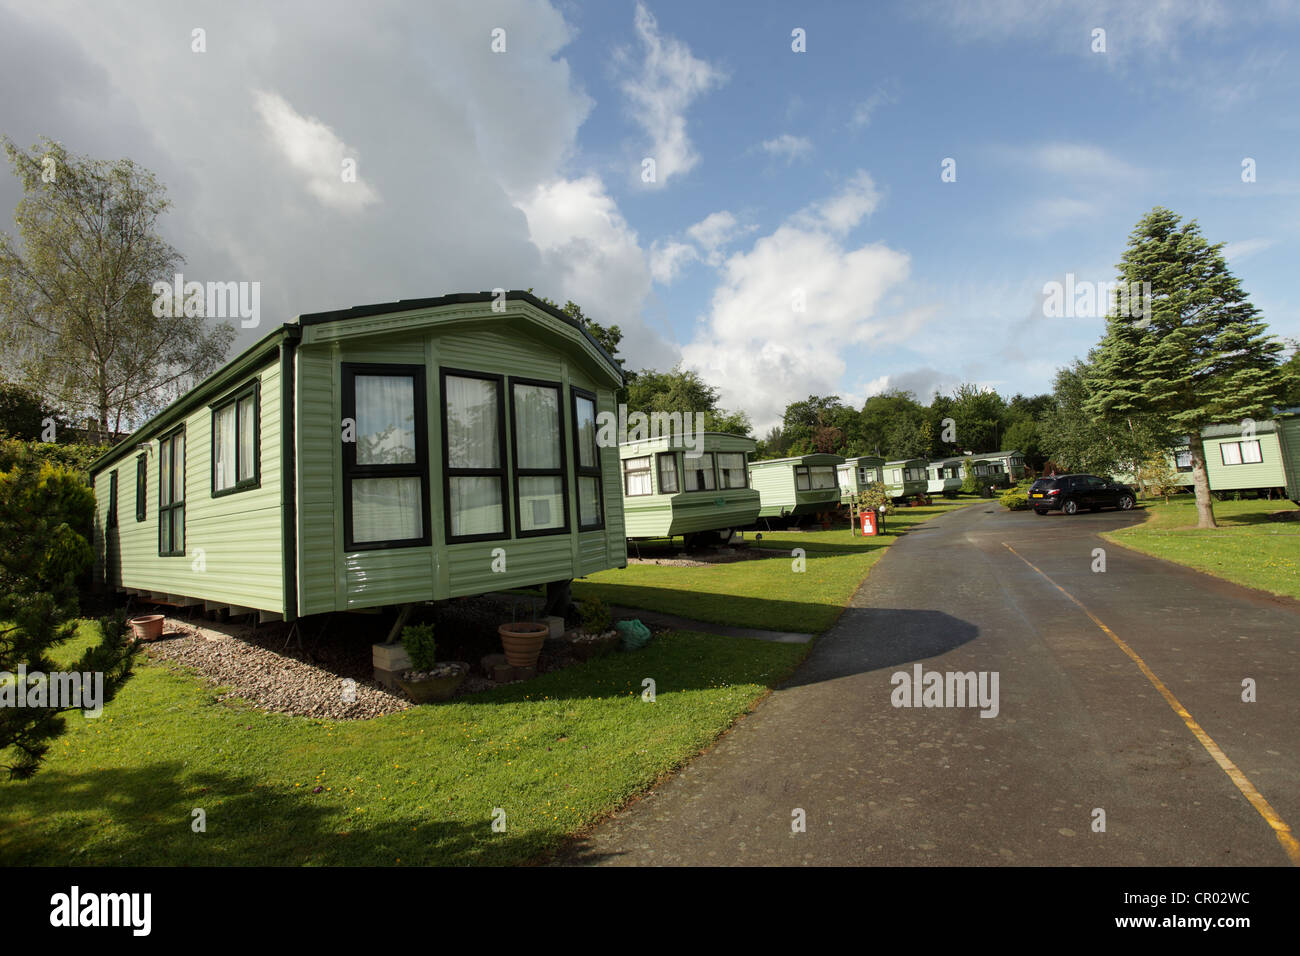 Static chalet or caravans for holiday homes in mid Wales. Stock Photo